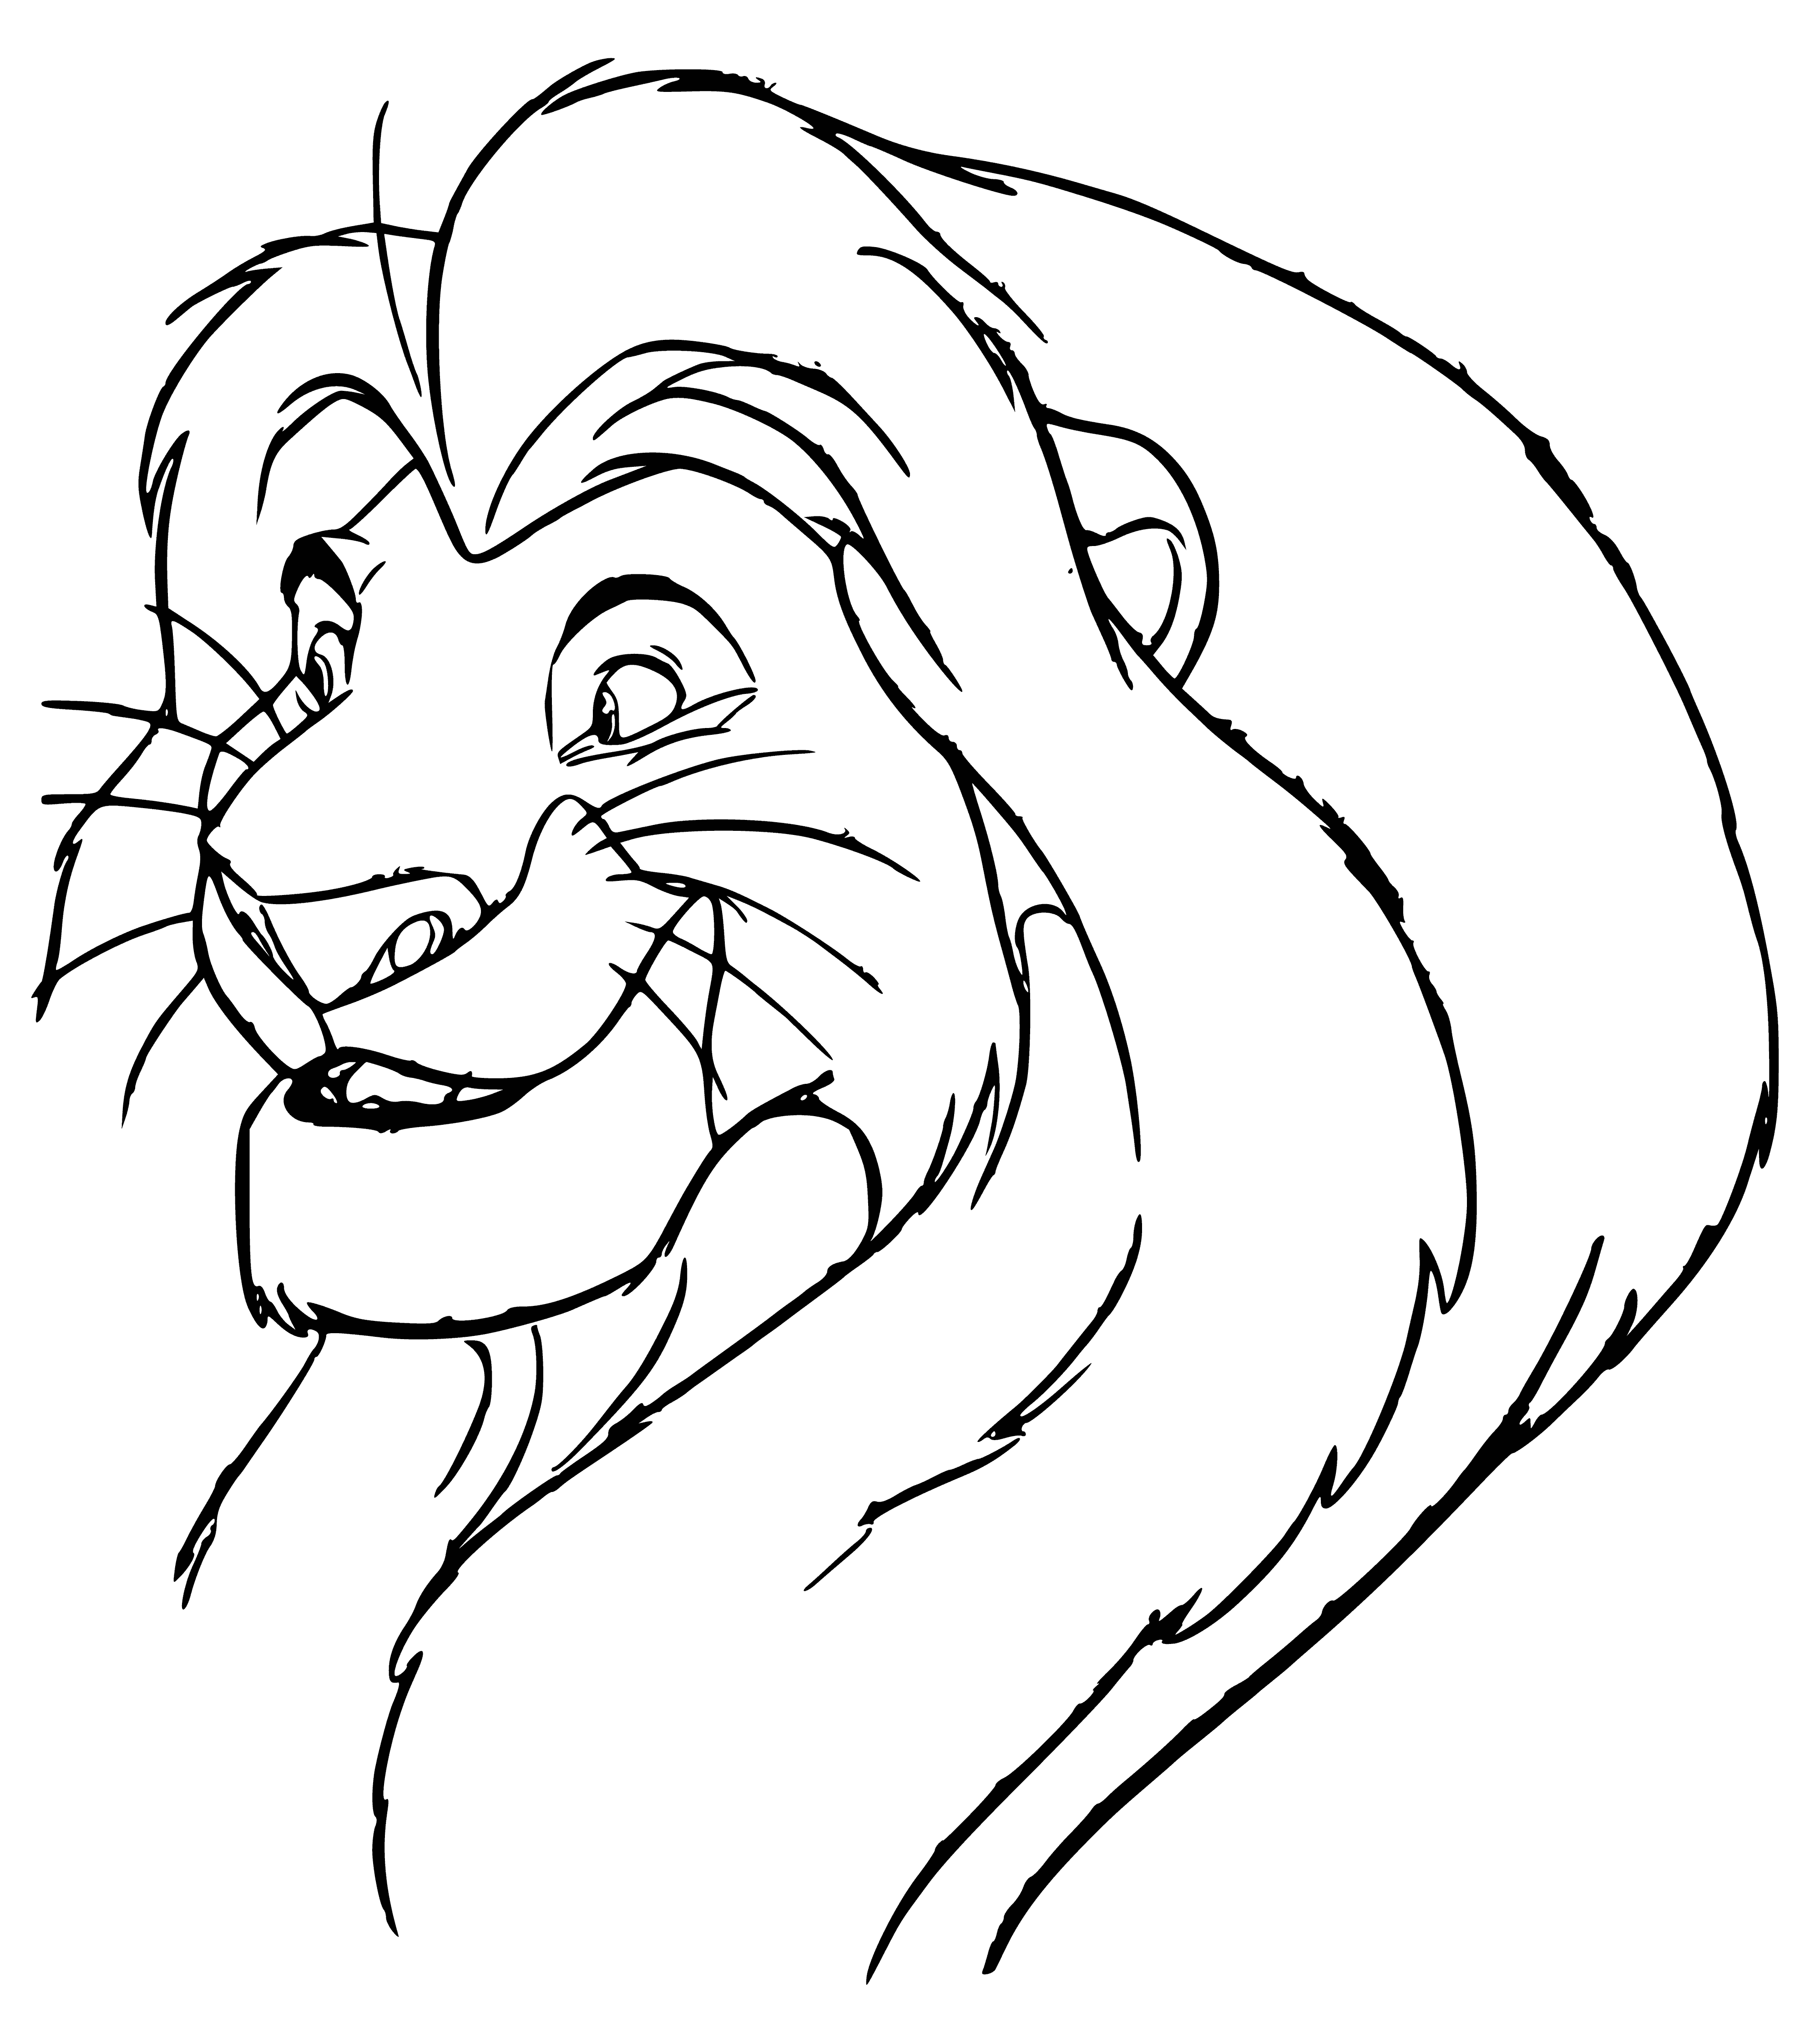 coloring page: A young lion lies on the ground, resting his head on his paw looking into the distance with a blowing mane.